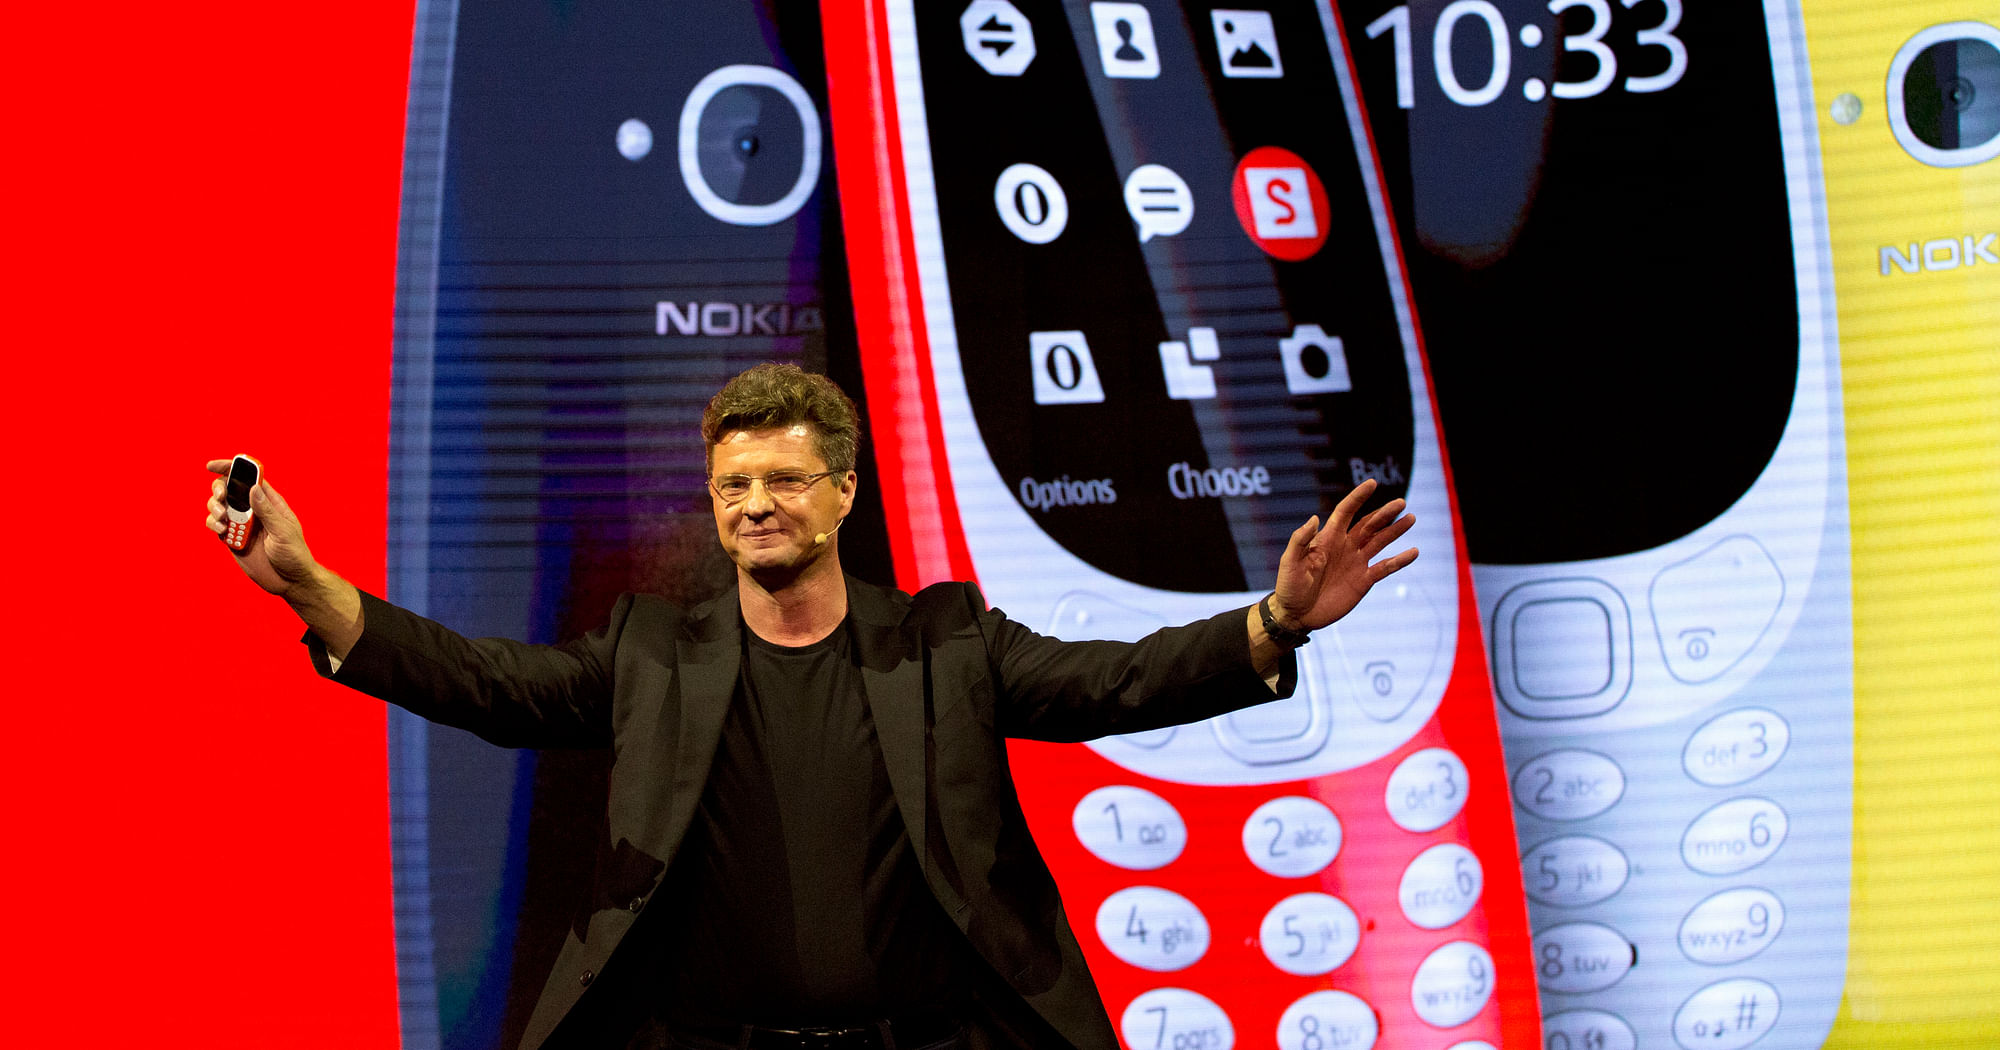 Nokia Brick mobiles to return with snake game included - Khaama Press